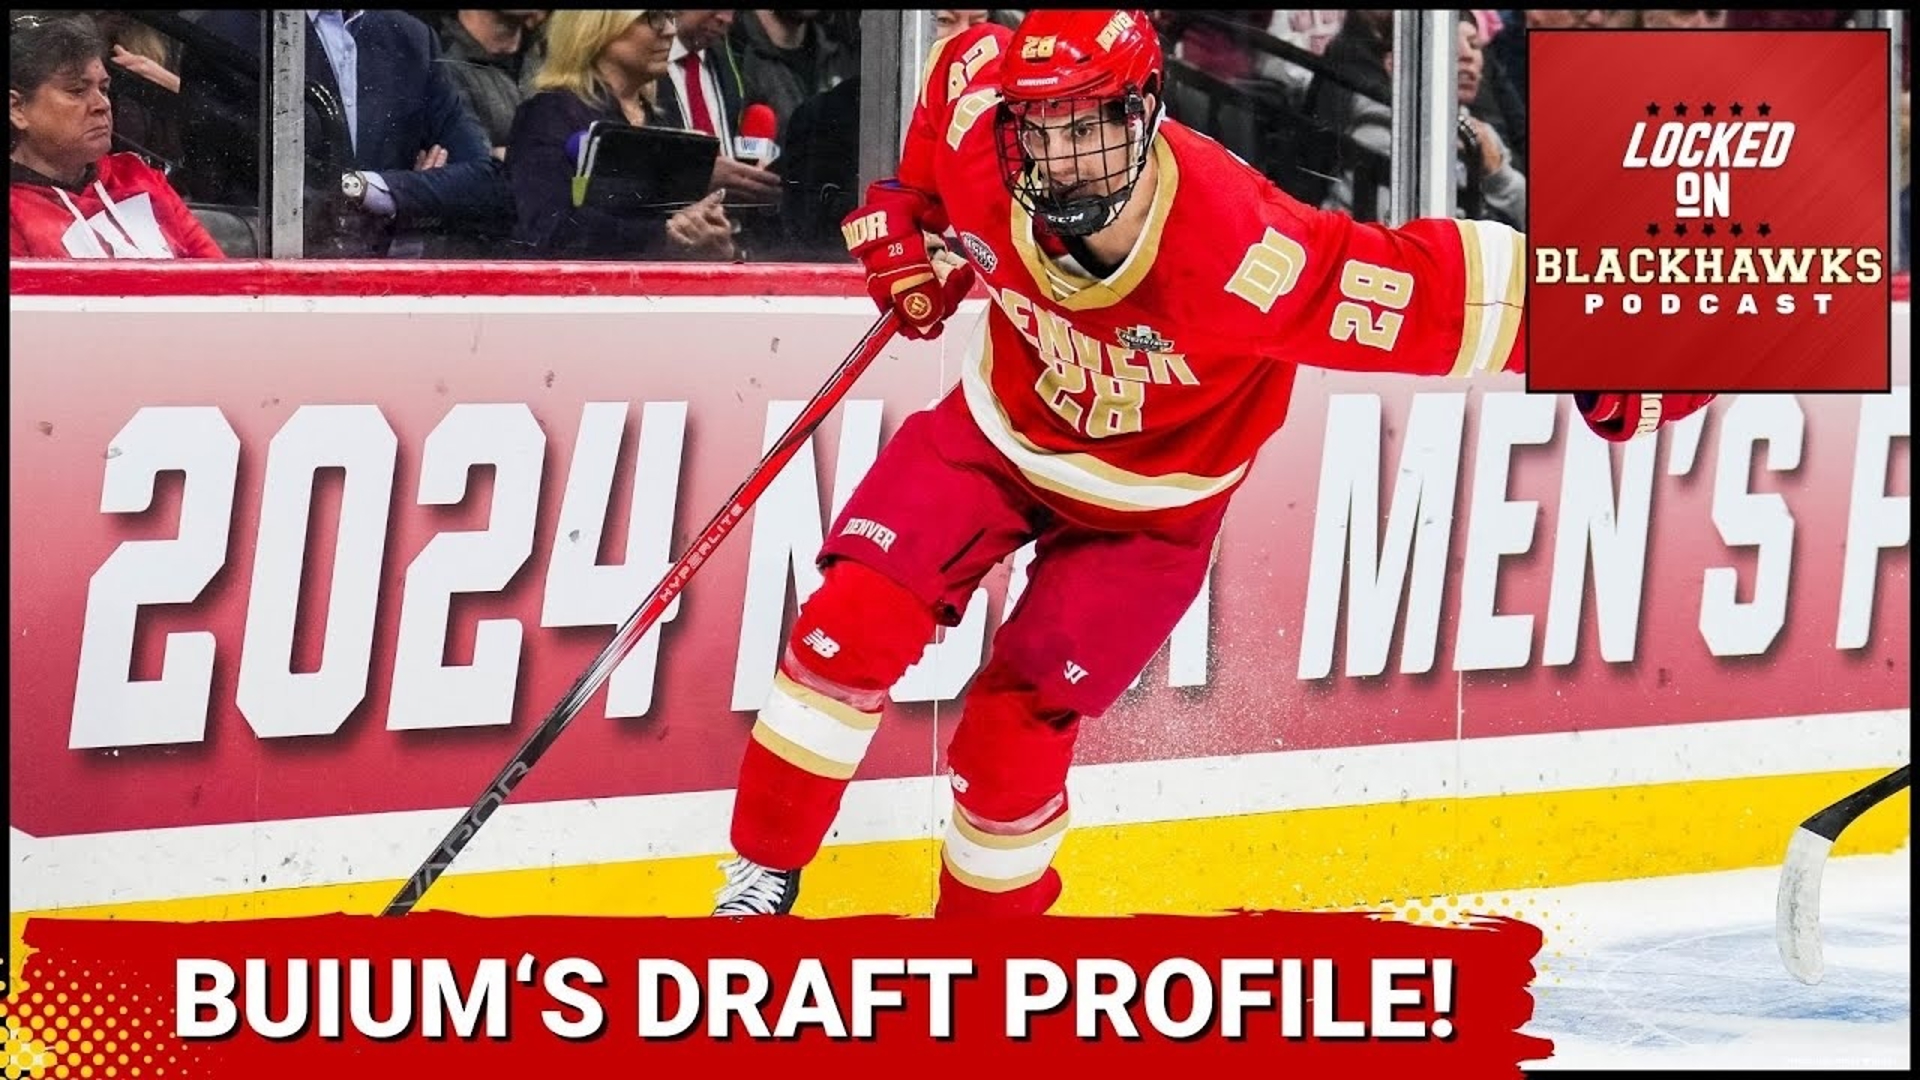 Thursday's episode begins with 18-year-old electrifying left-handed defenseman Zeev Buium's 2024 NHL Draft Profile!